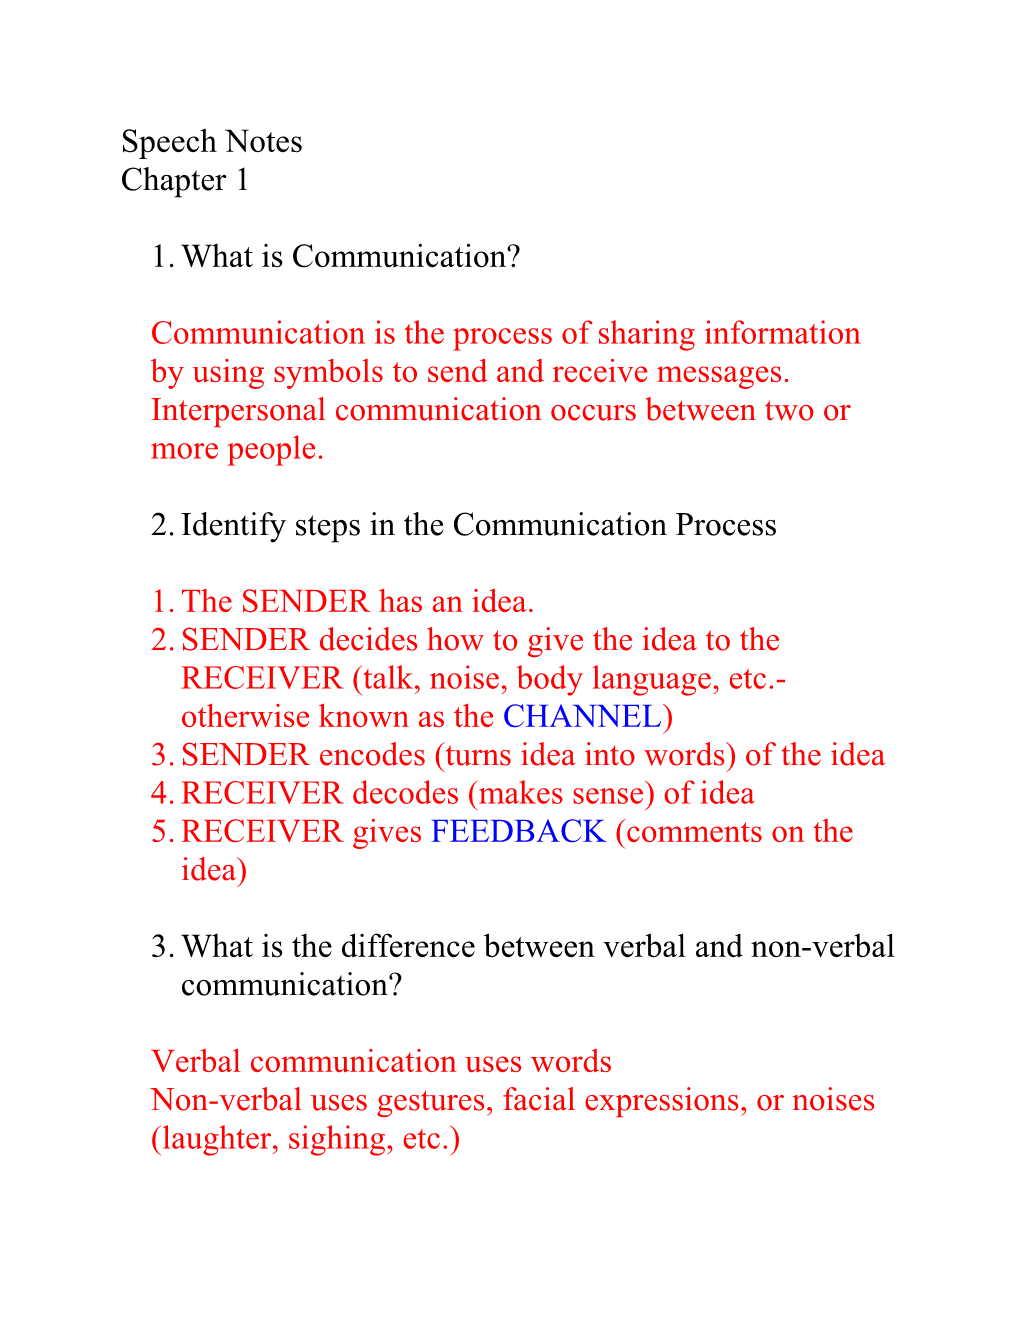 Communication Is the Process of Sharing Information by Using Symbols to Send and Receive